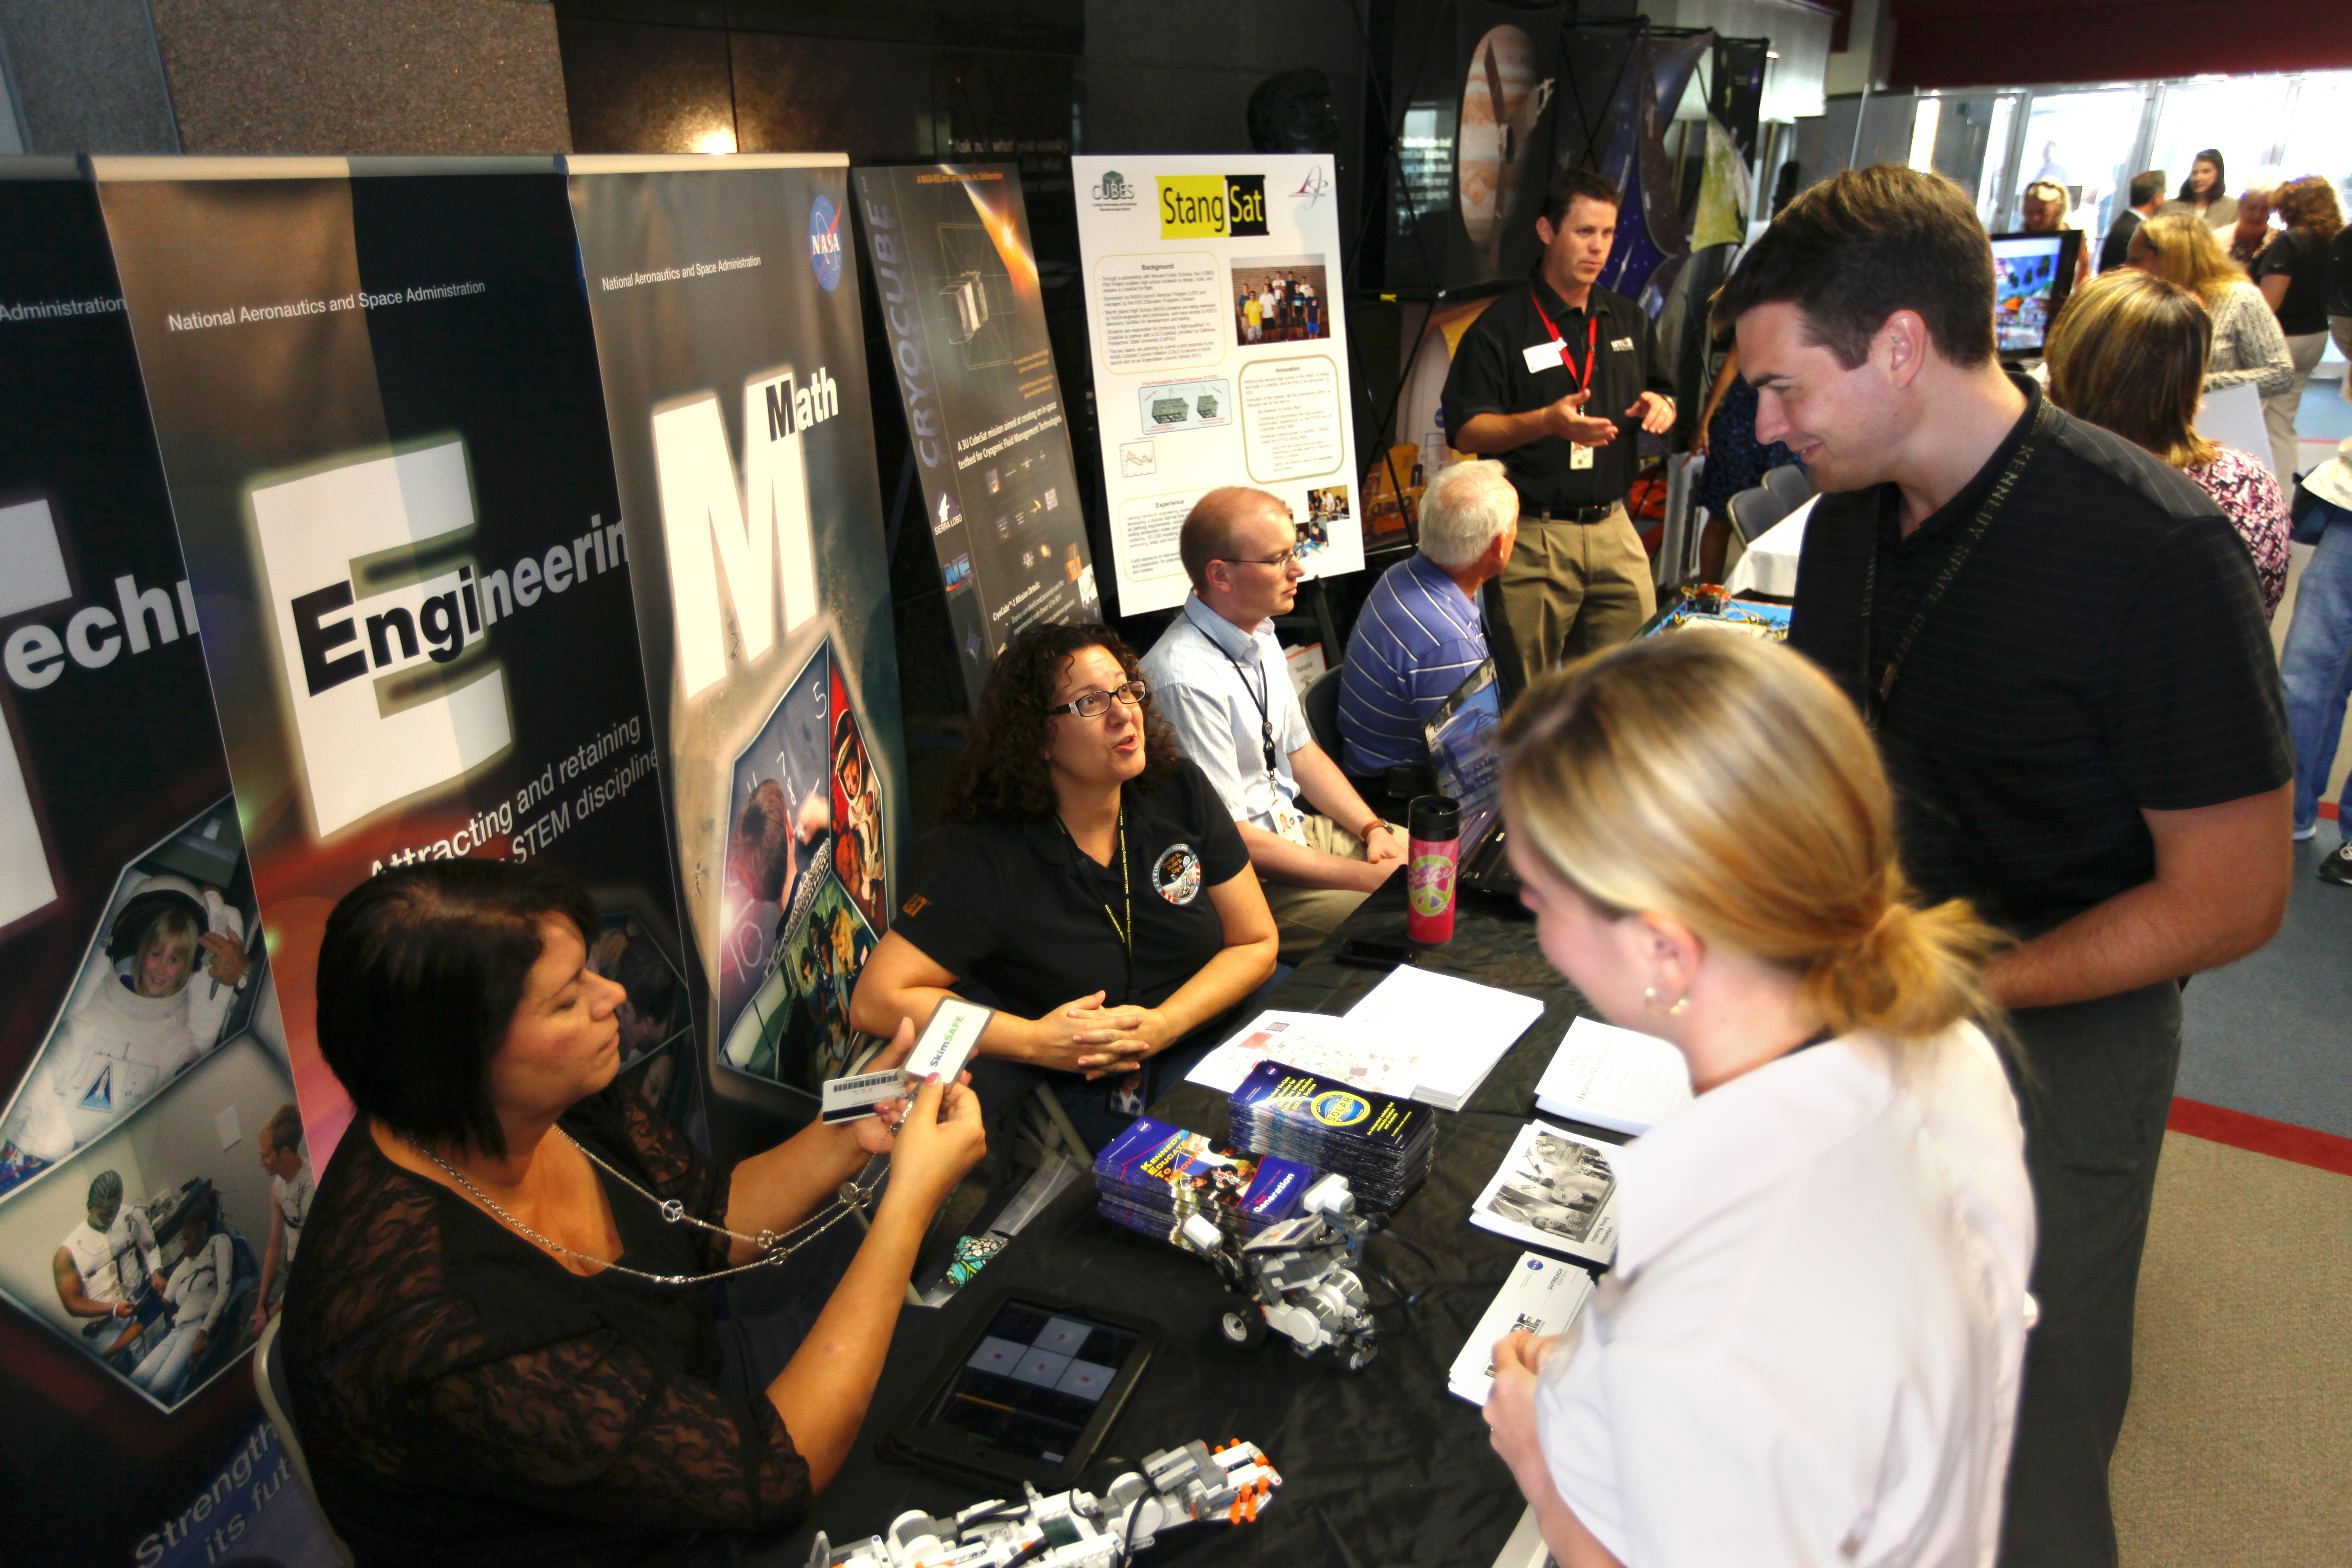 Employees showed off some of their ideas and toured Kennedy Space Center's unique labs and facilities during the center's first Innovation Expo.